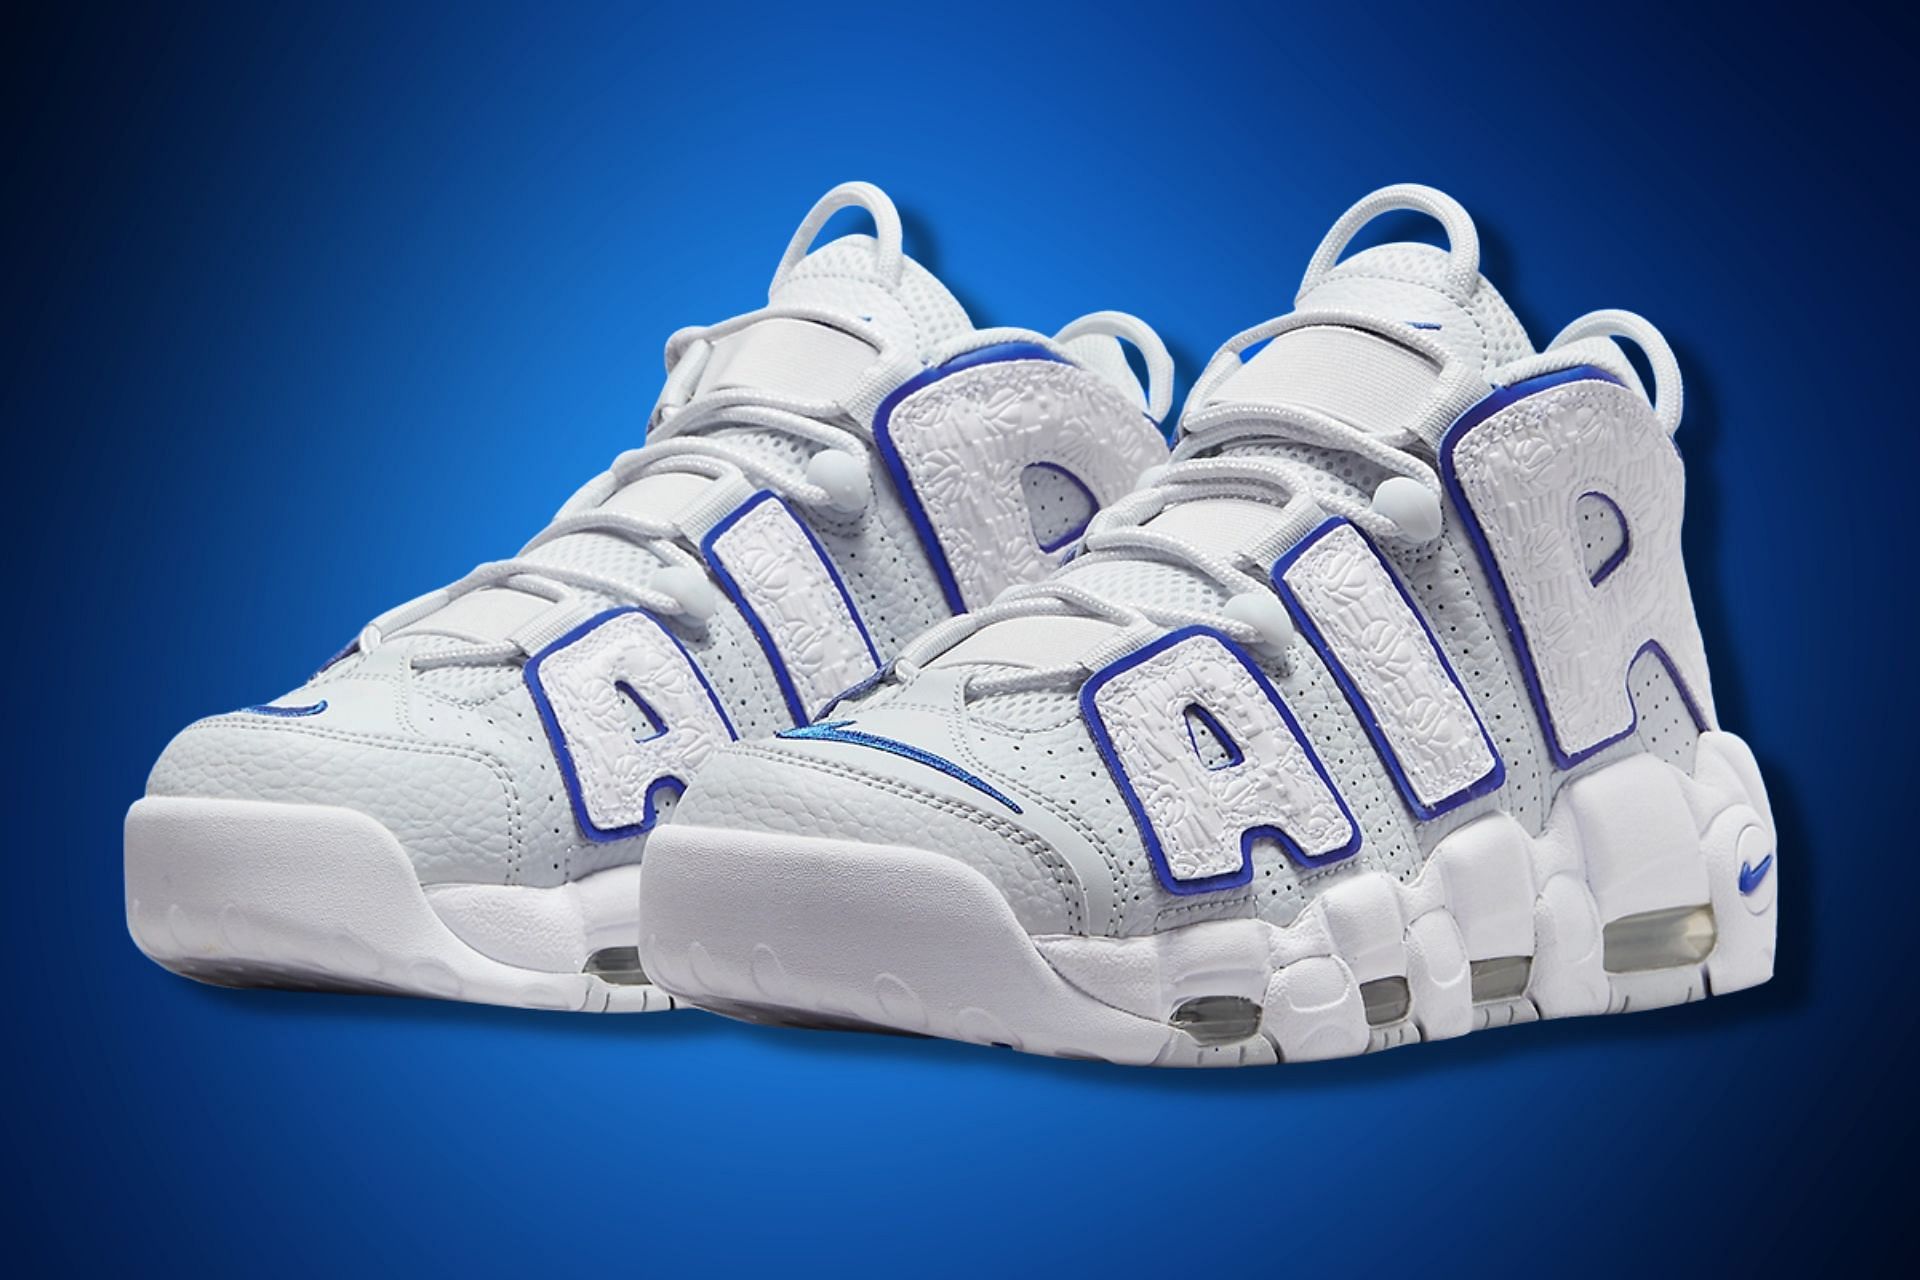 Nike Air More Uptempo Embossed shoes (Image via Nike)